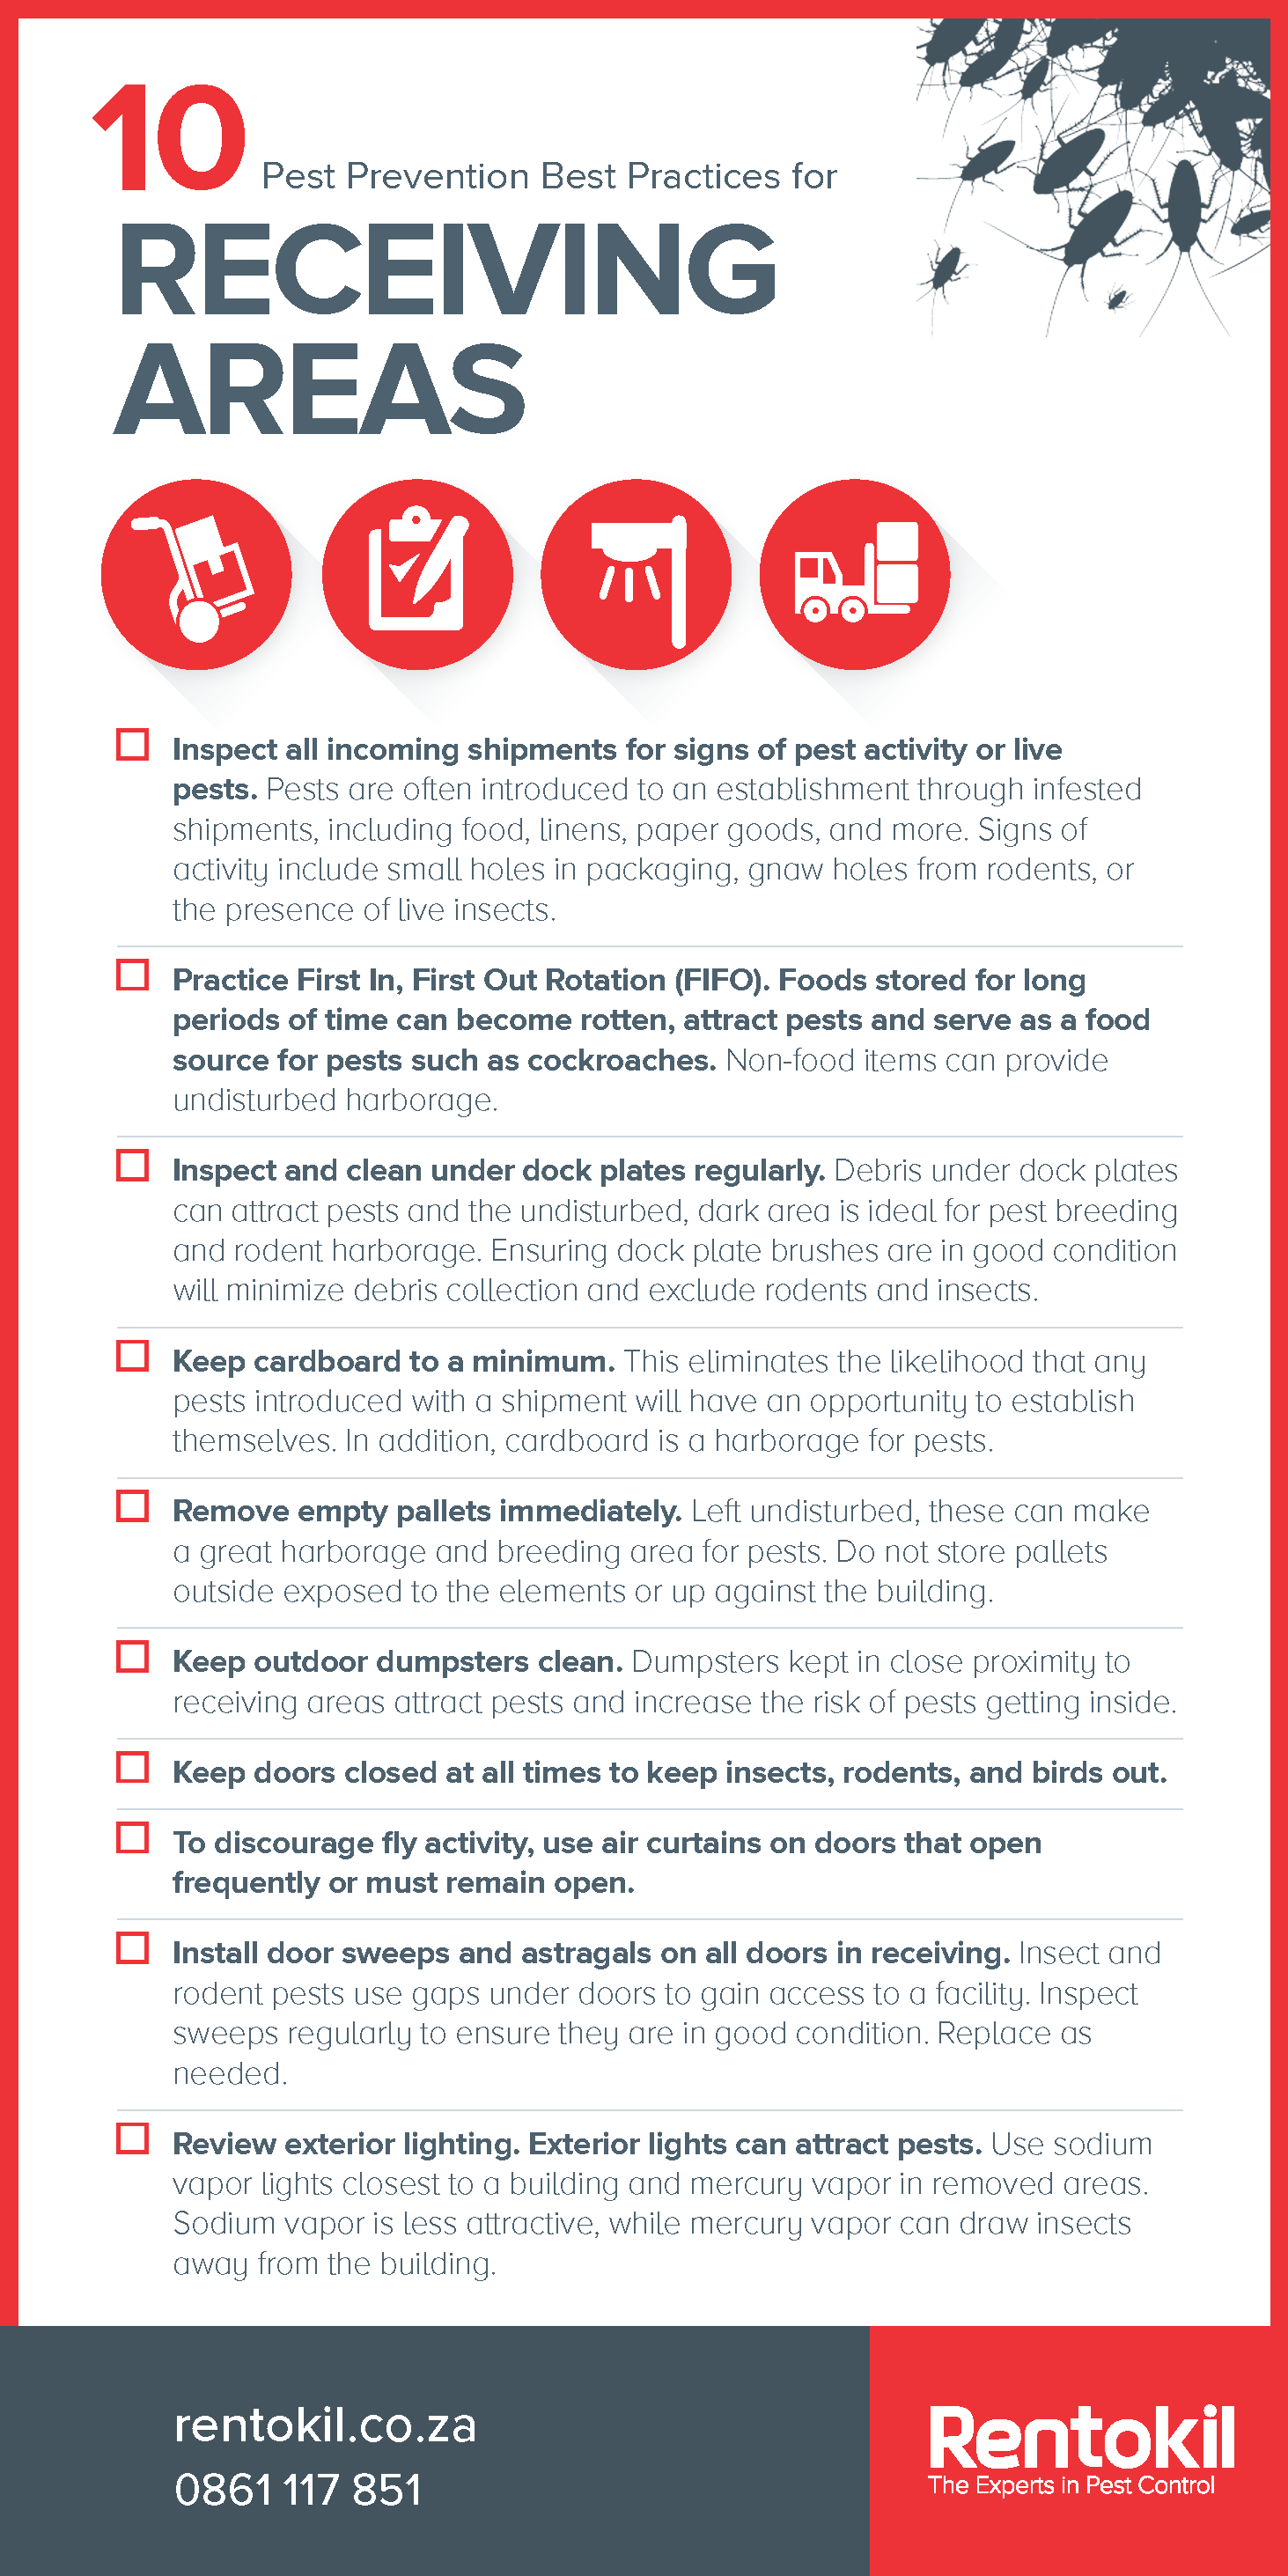 Pest Prevention Poster - 10 Best Practices Checklist for Receiving Areas